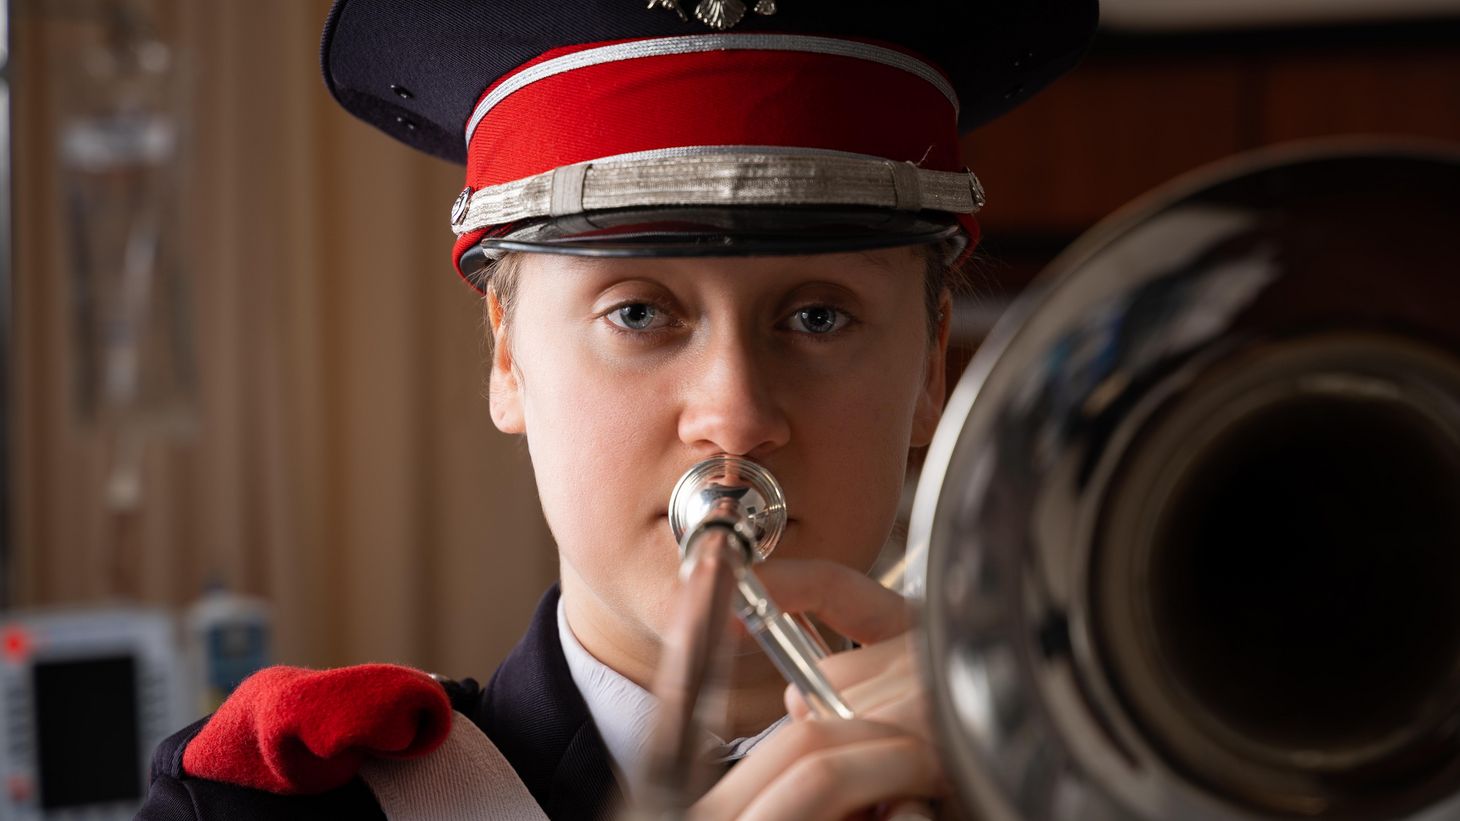 nursing student with trombone in marching band attire